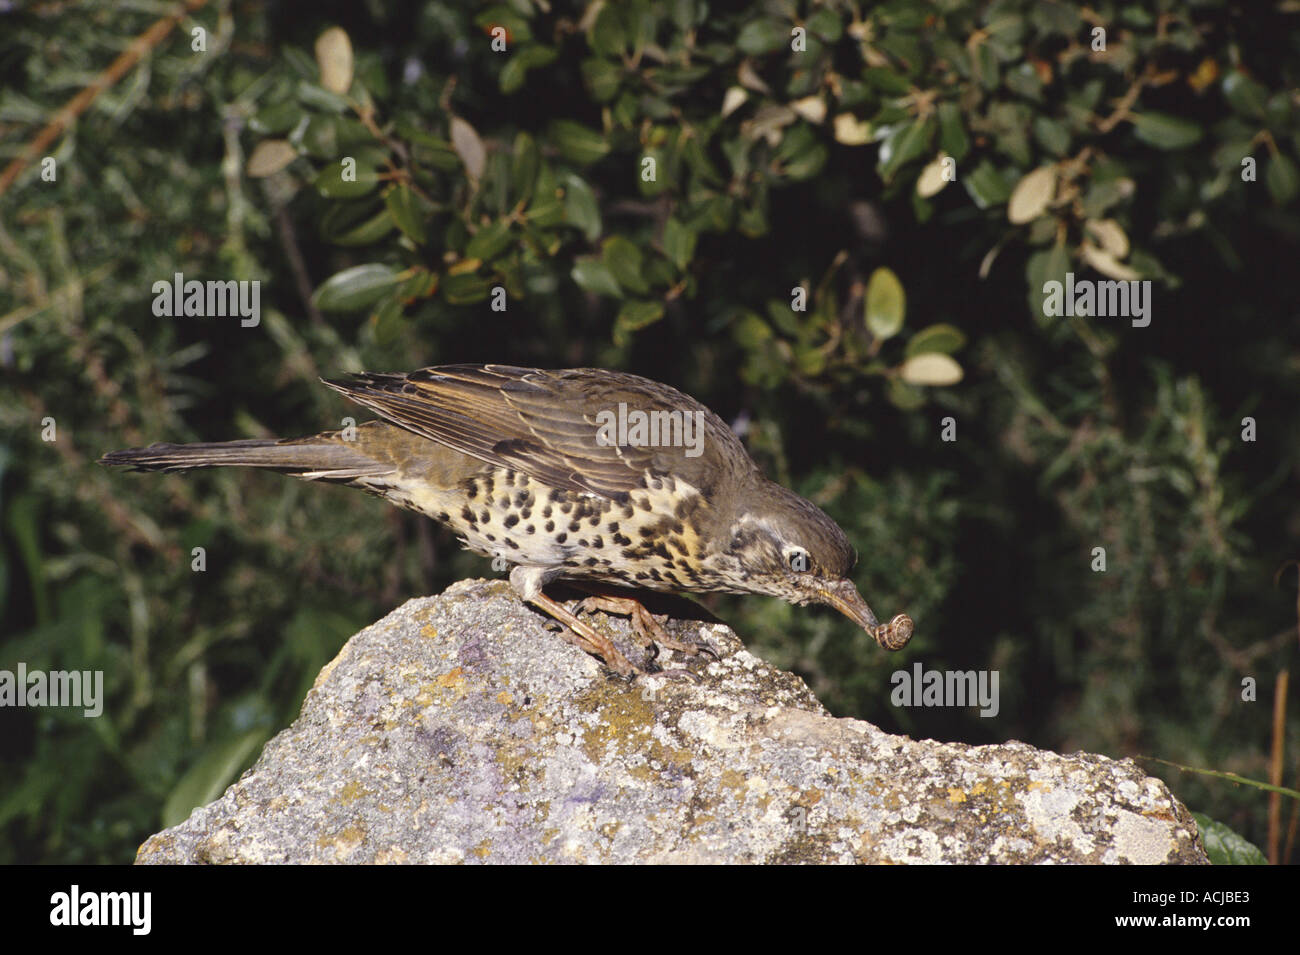 Song thrush at its anvil about to smash snail shell on rock Turdus philomelos Stock Photo